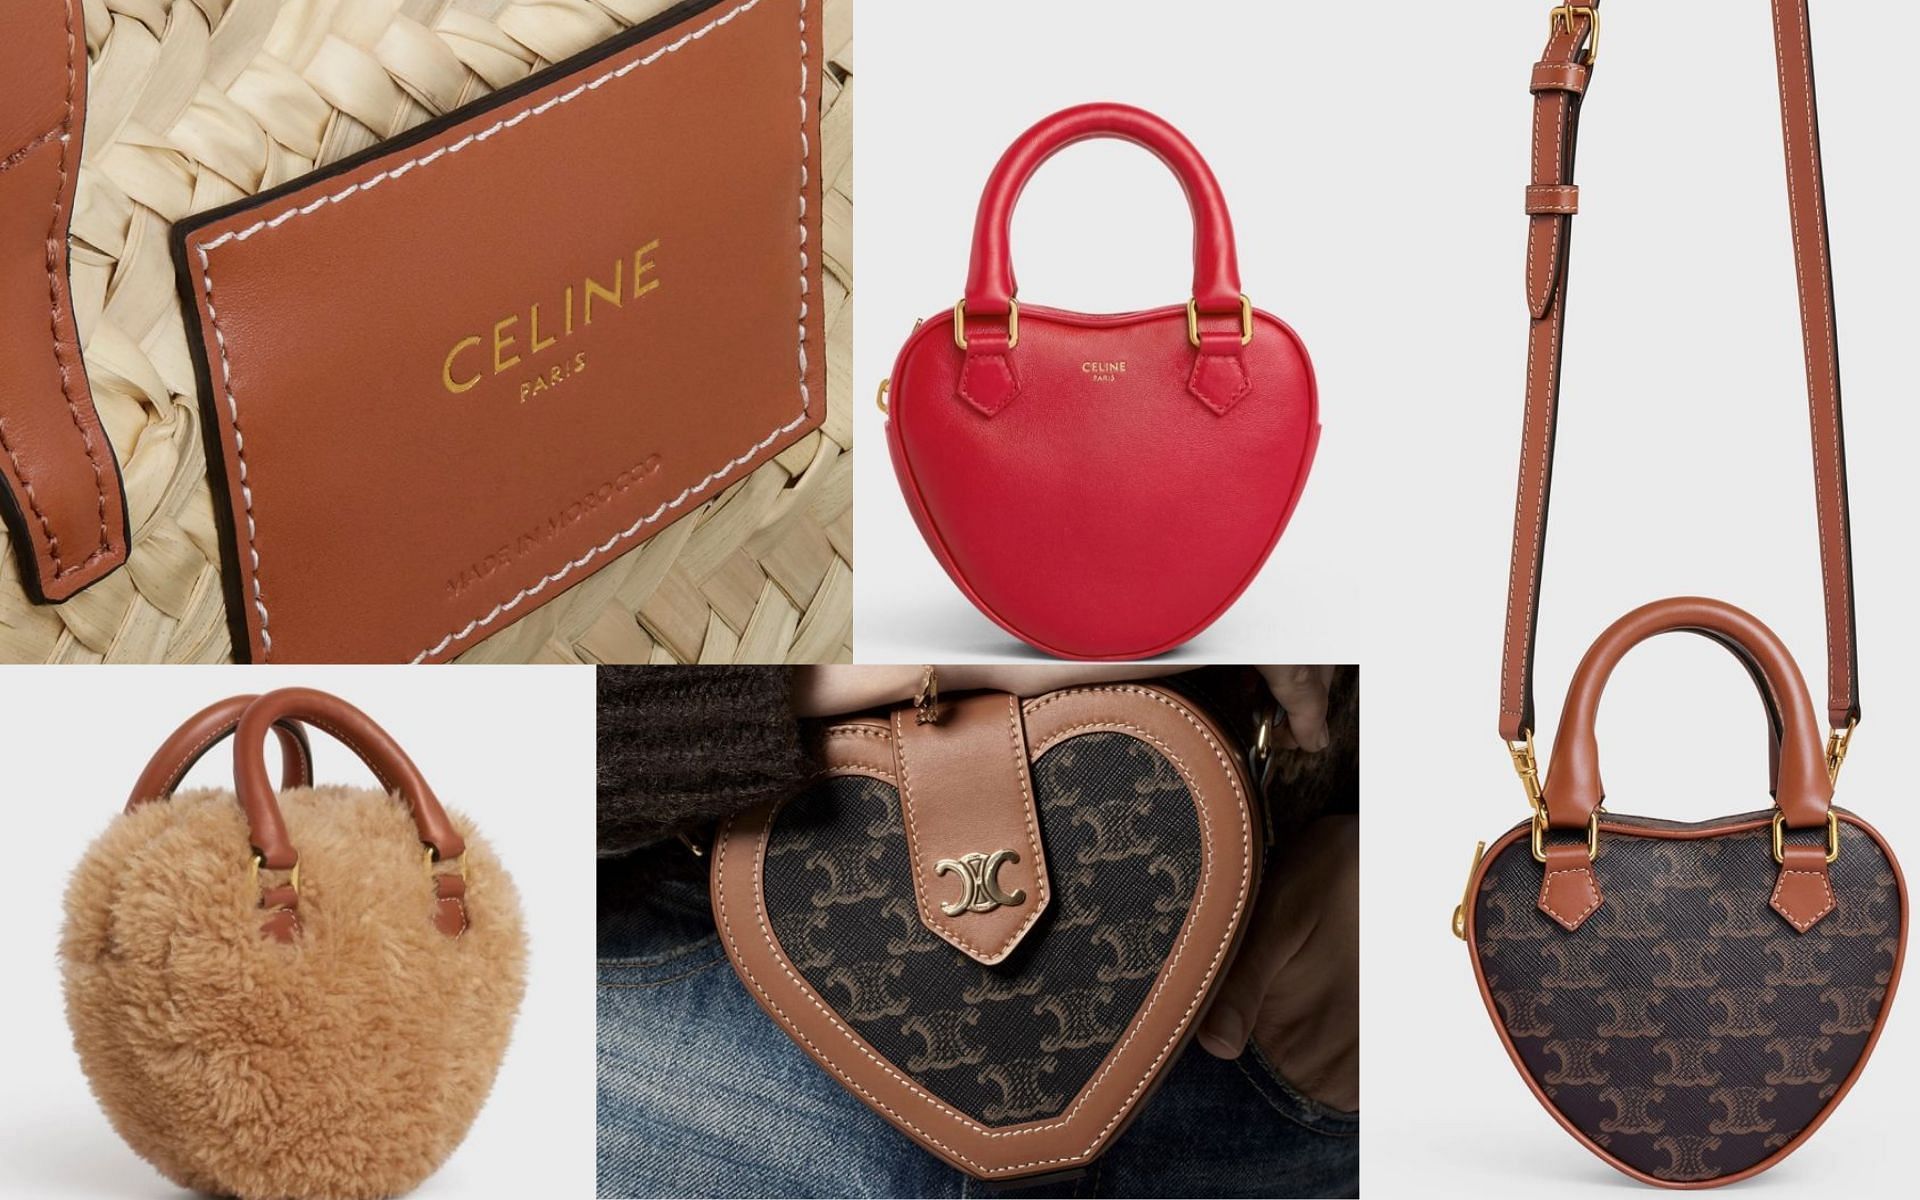 Louis vuitton just released one of their valentines day collection bag